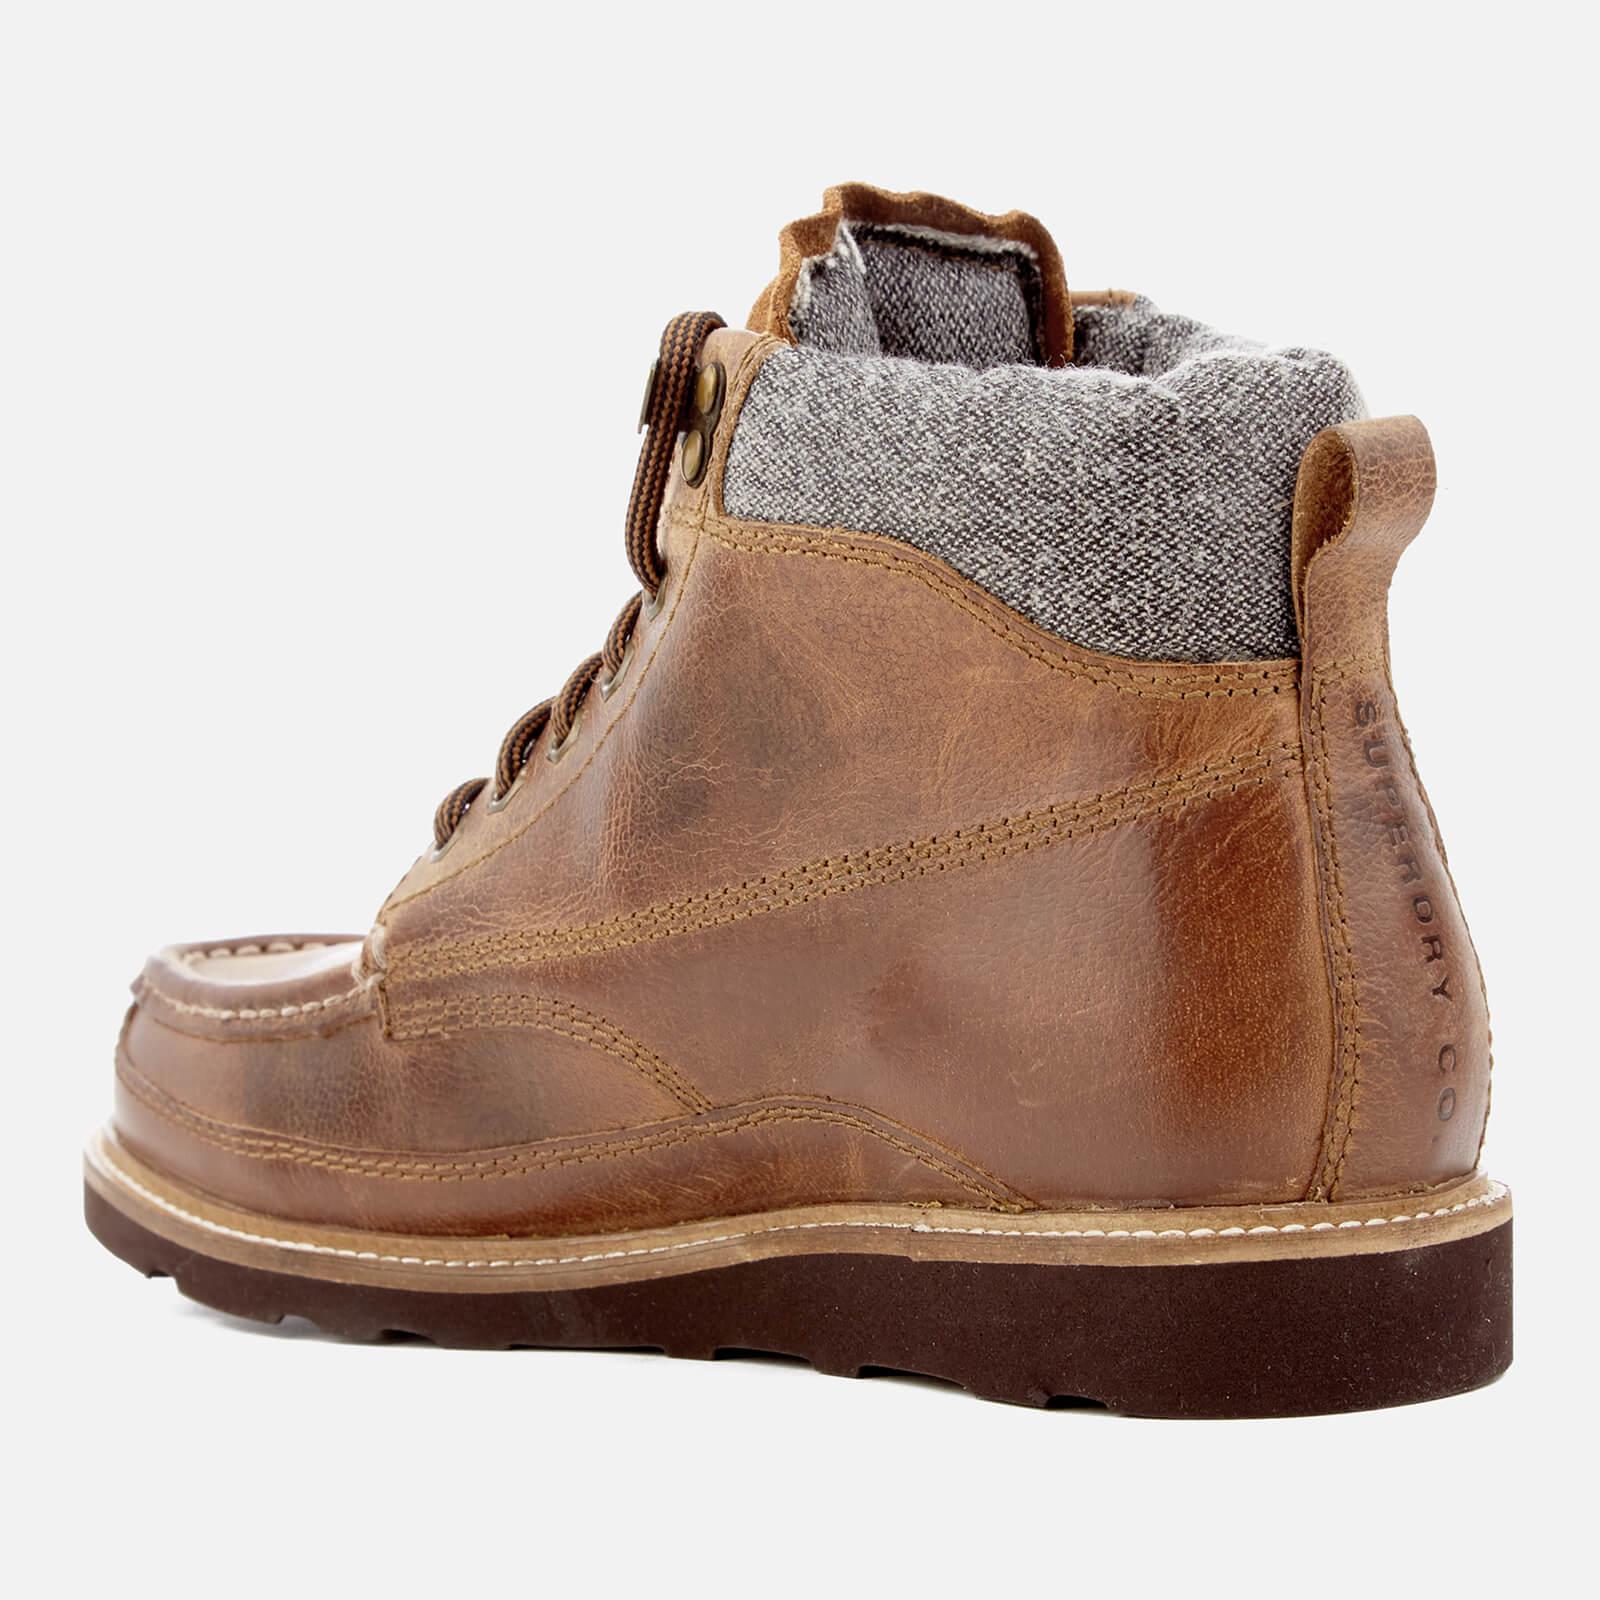 Superdry Leather Men's Mountain Range Boots in Tan (Brown) for Men - Lyst